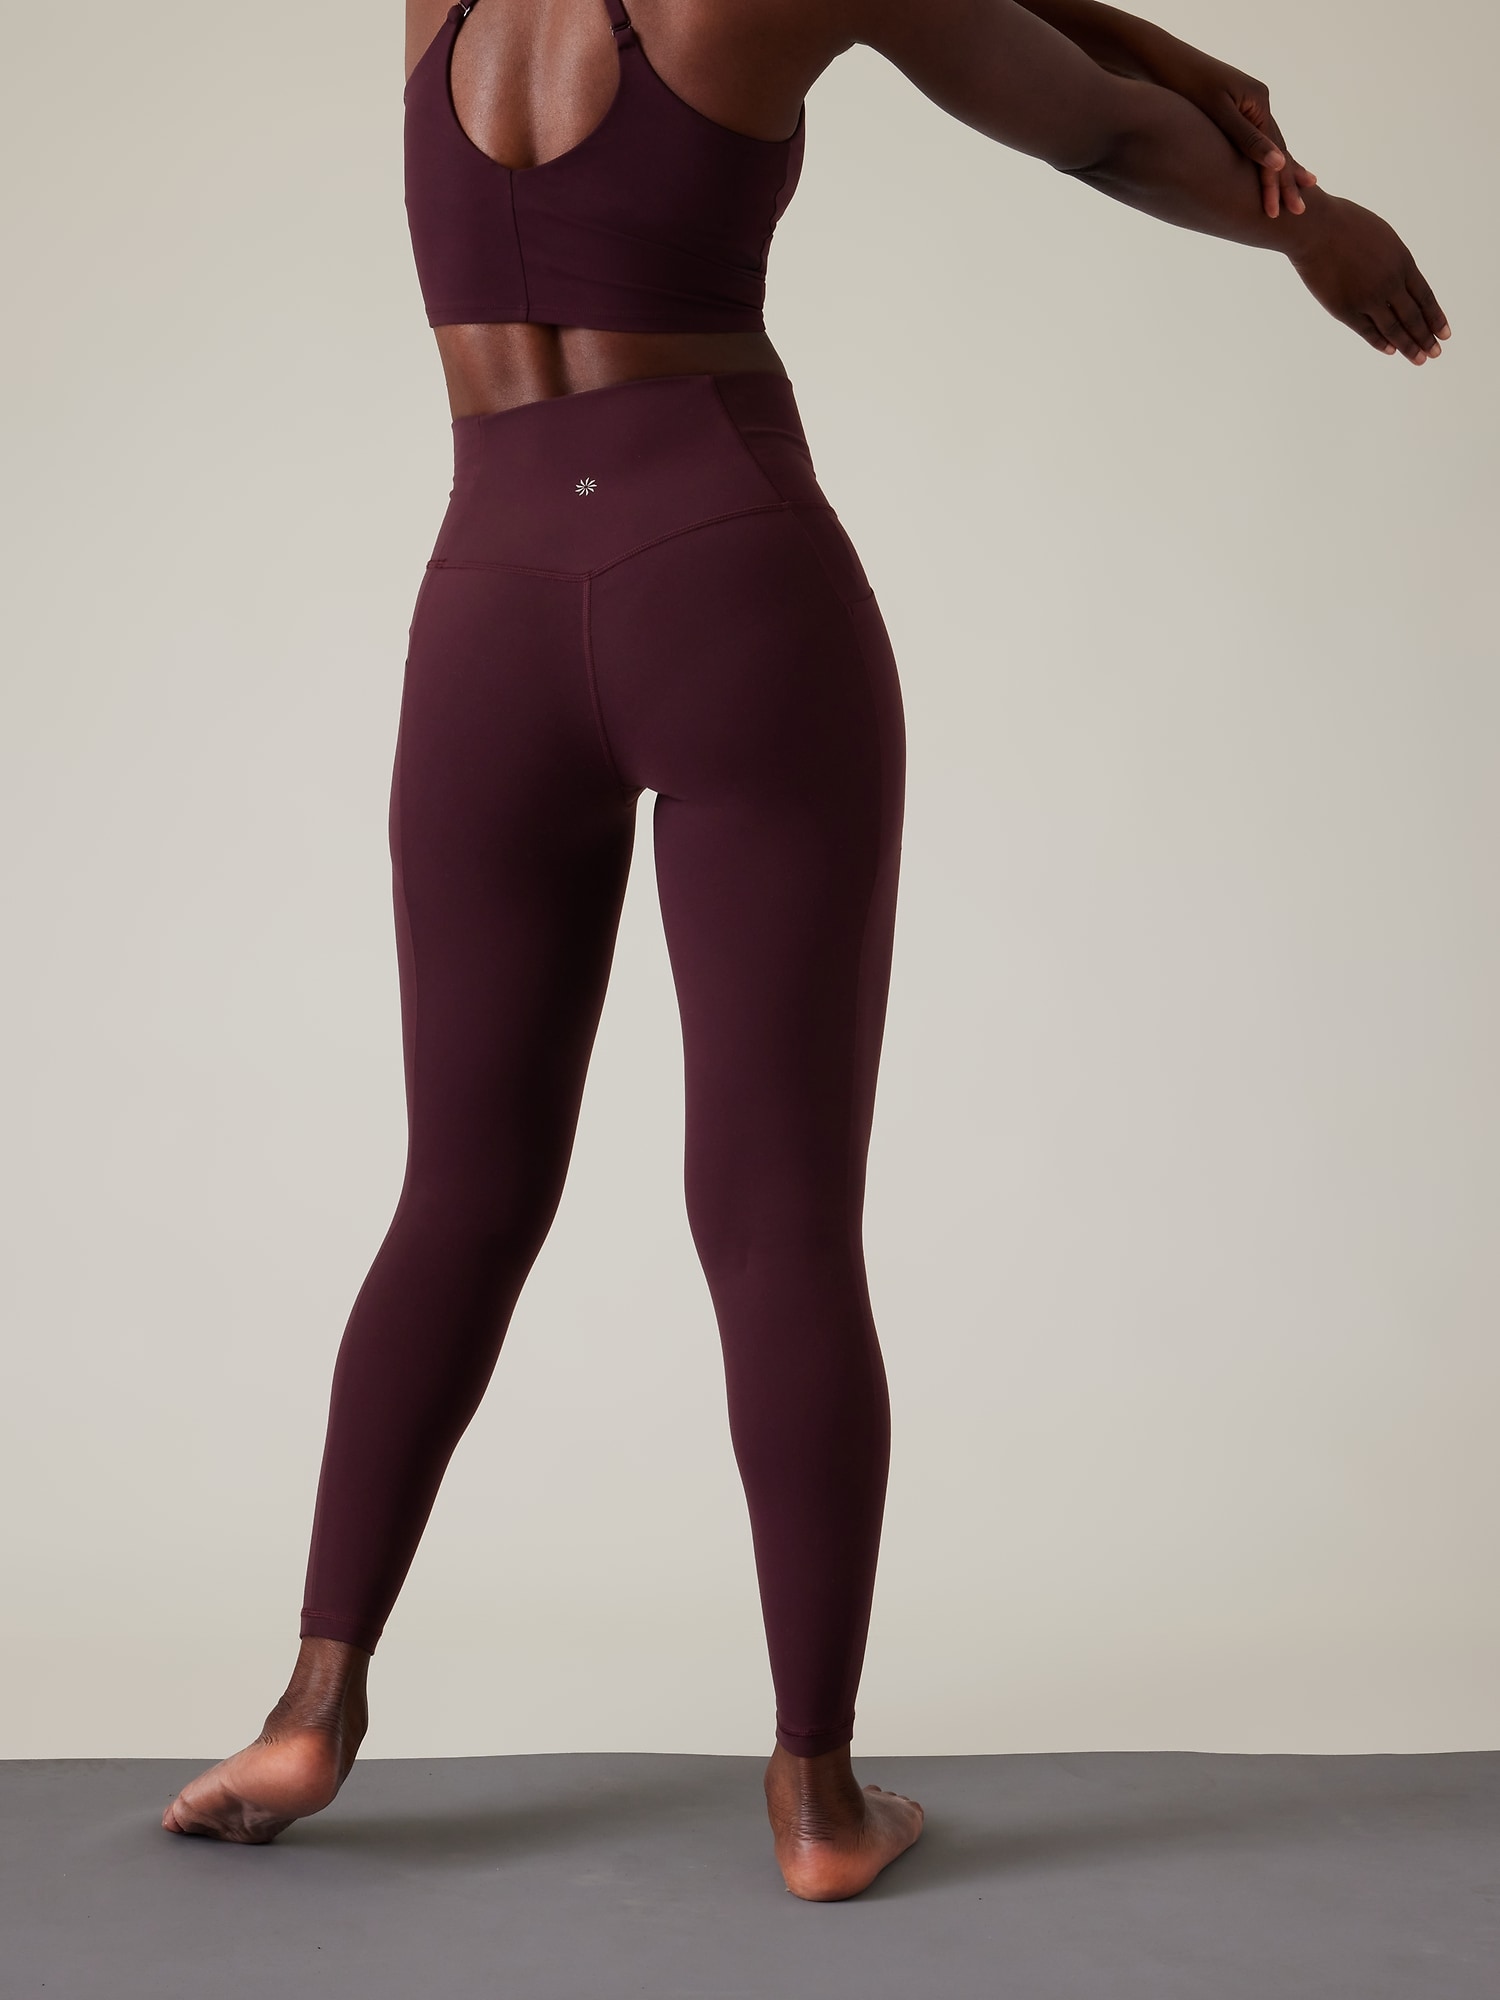 Athleta Victorian Berry Luxe Mesh 7/8 Tight Yoga Pant #631865 NEW! L Large